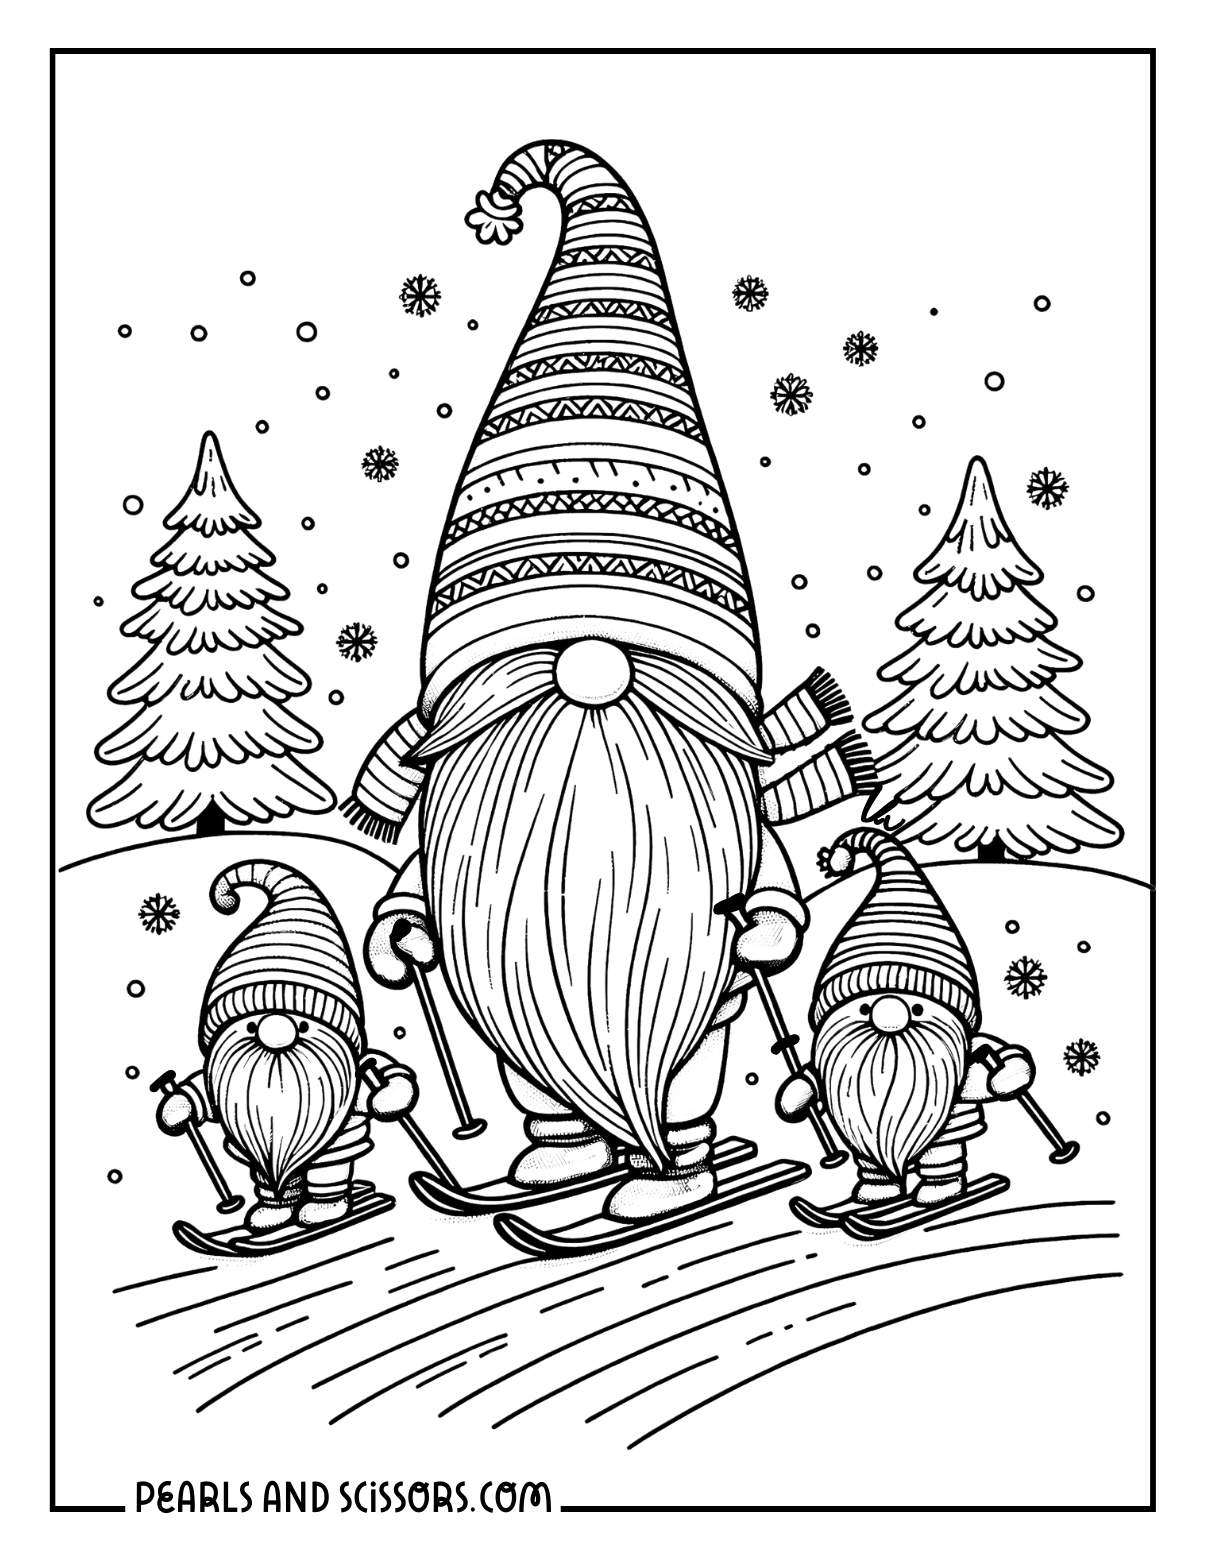 Gnome family skiing during the Christmas holiday season coloring page